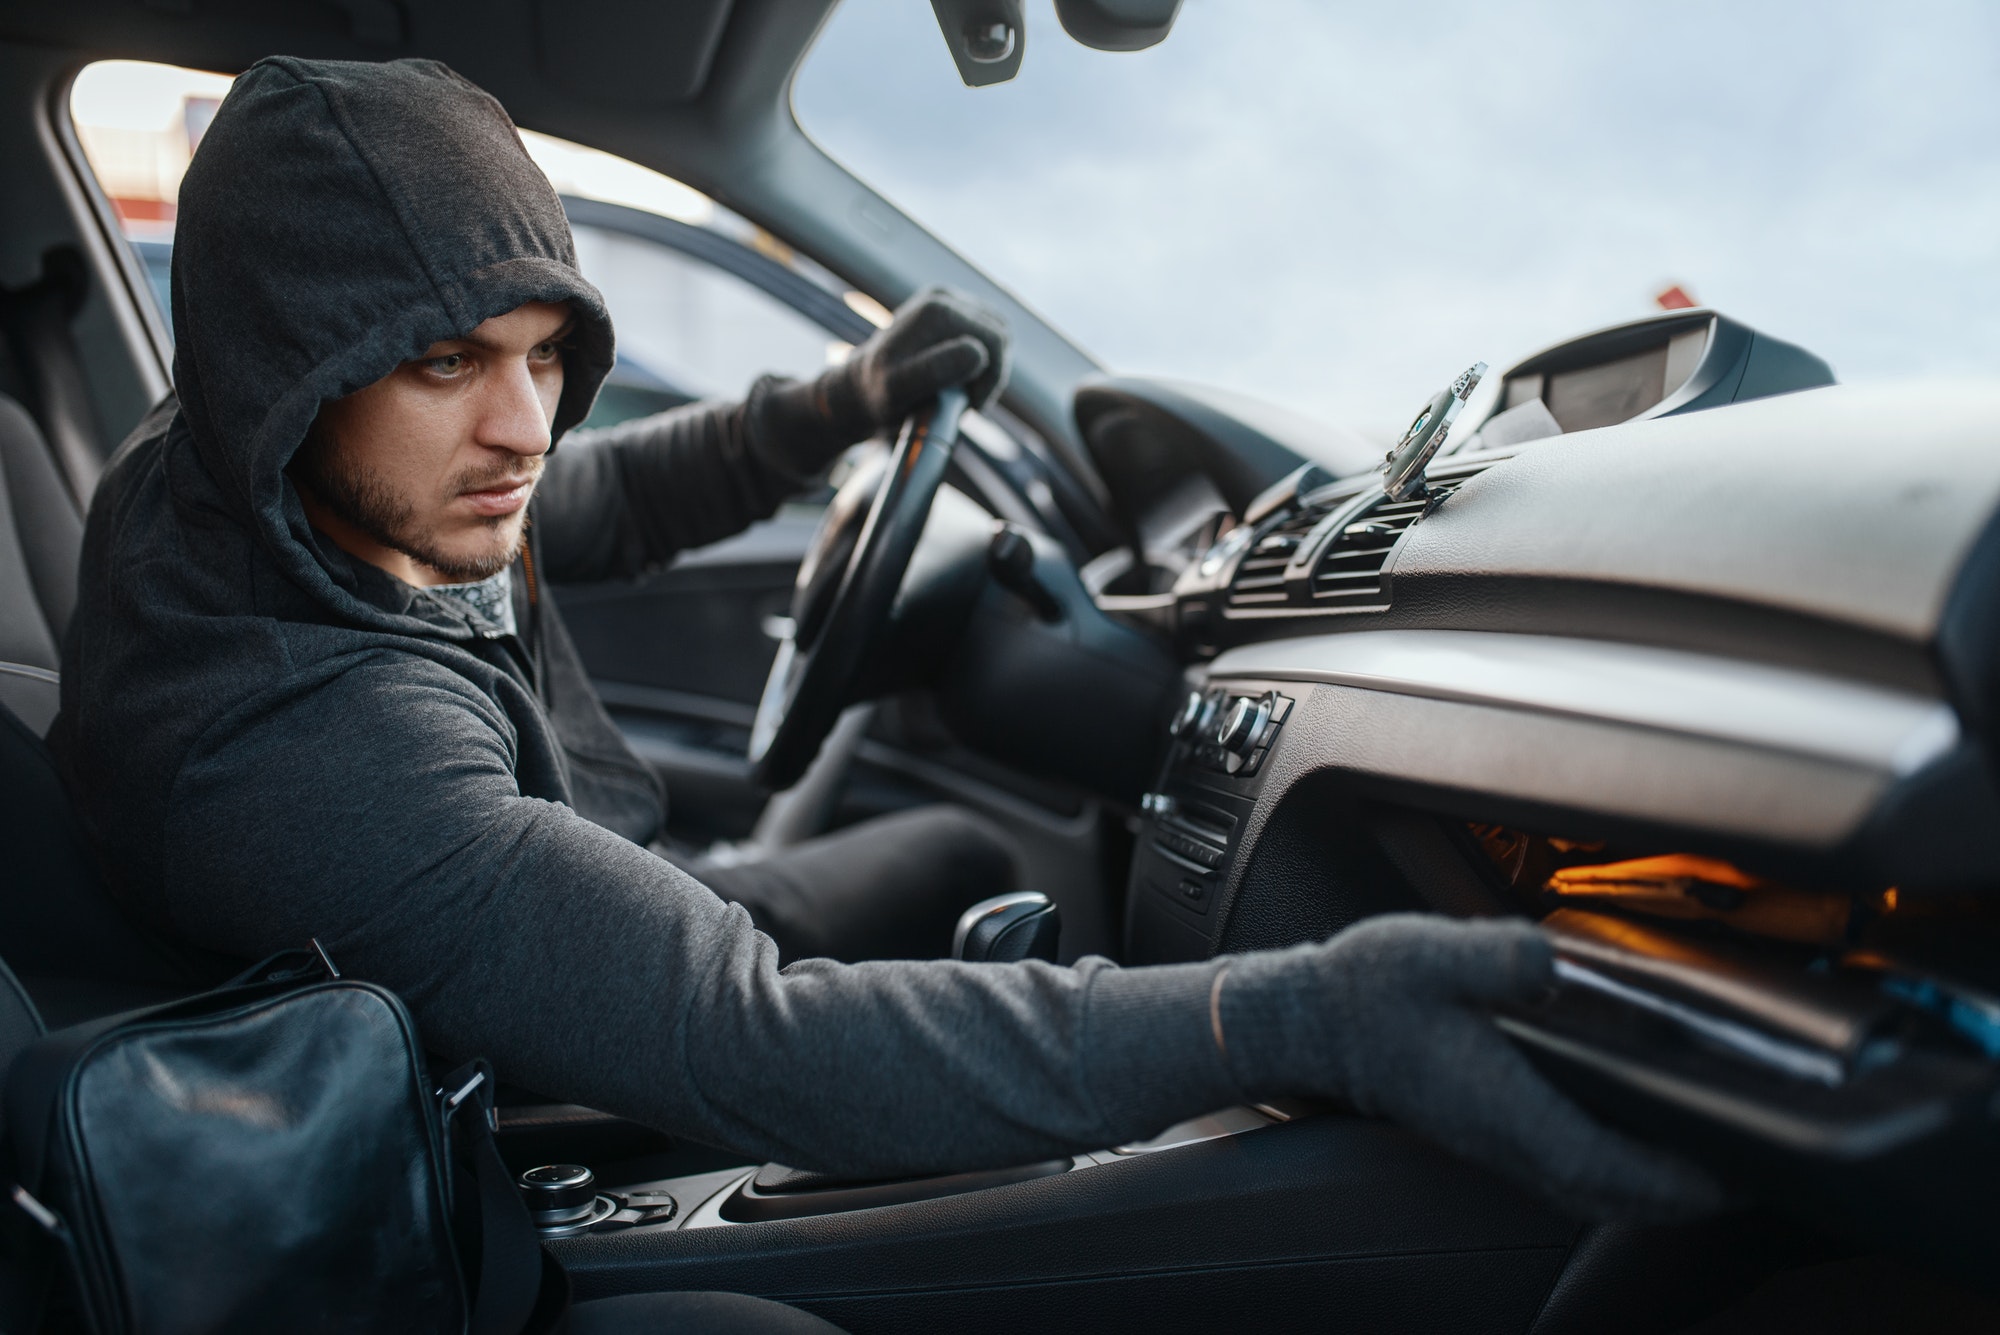 Car robber searches the glove compartment